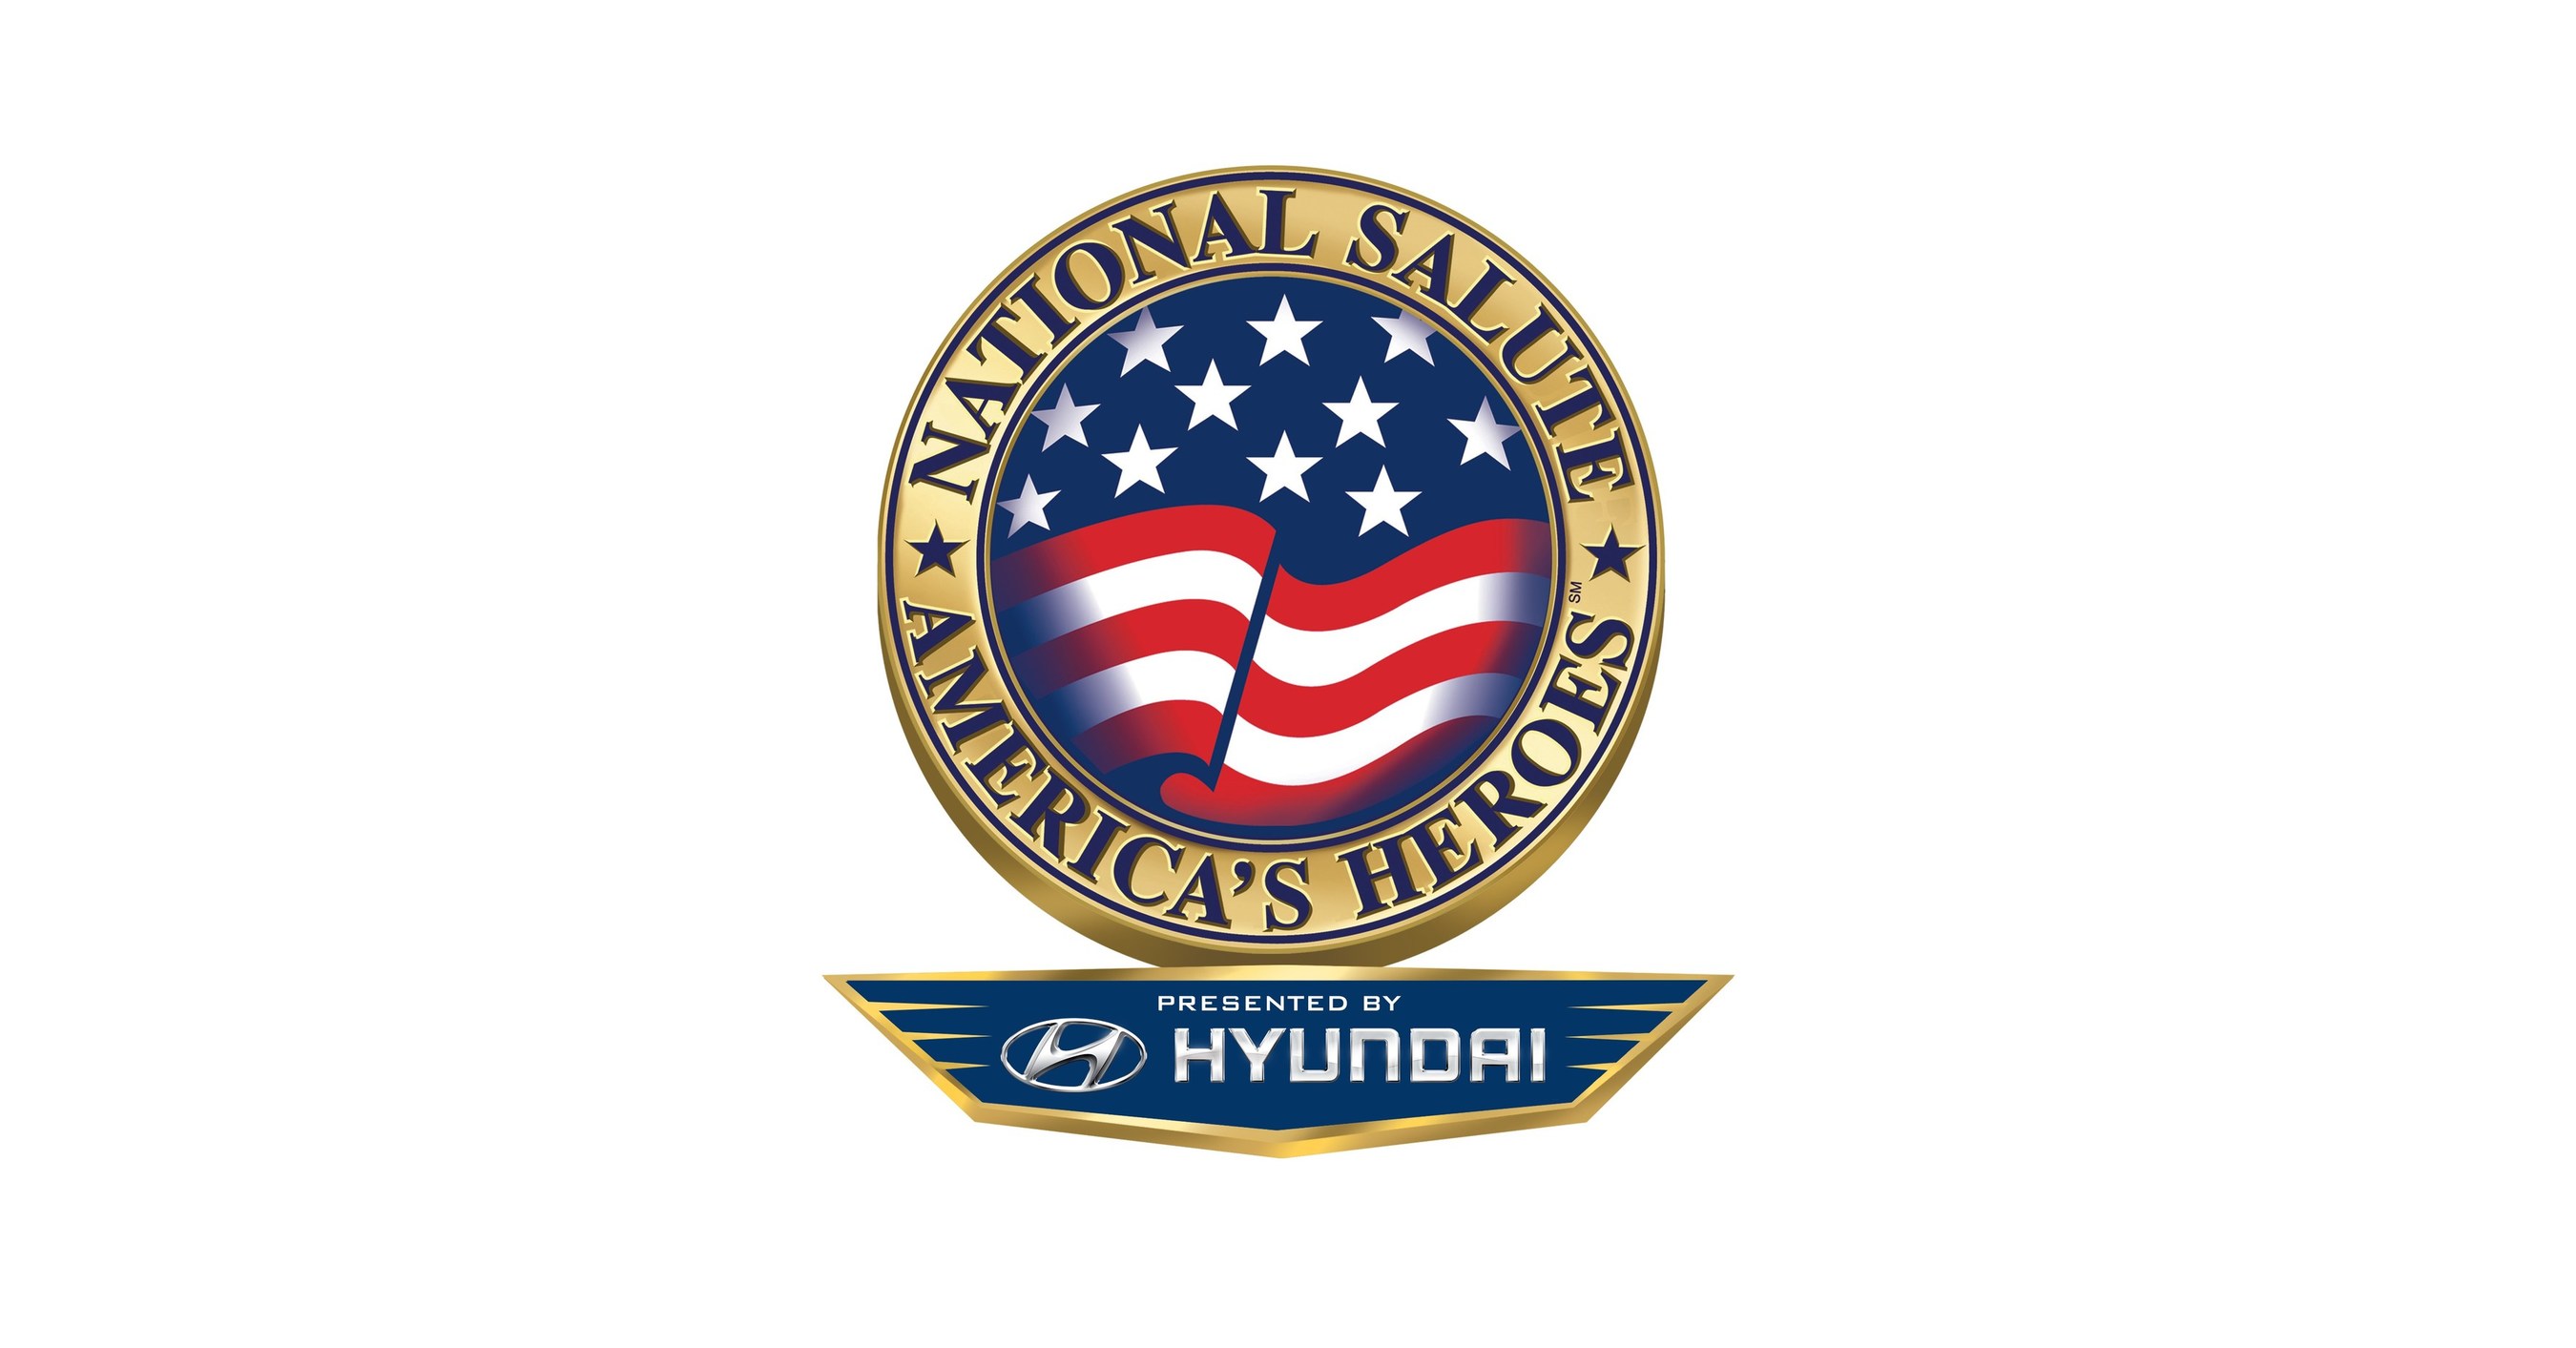 Hyundai Extends Sponsorship of National Salute to America's Heroes